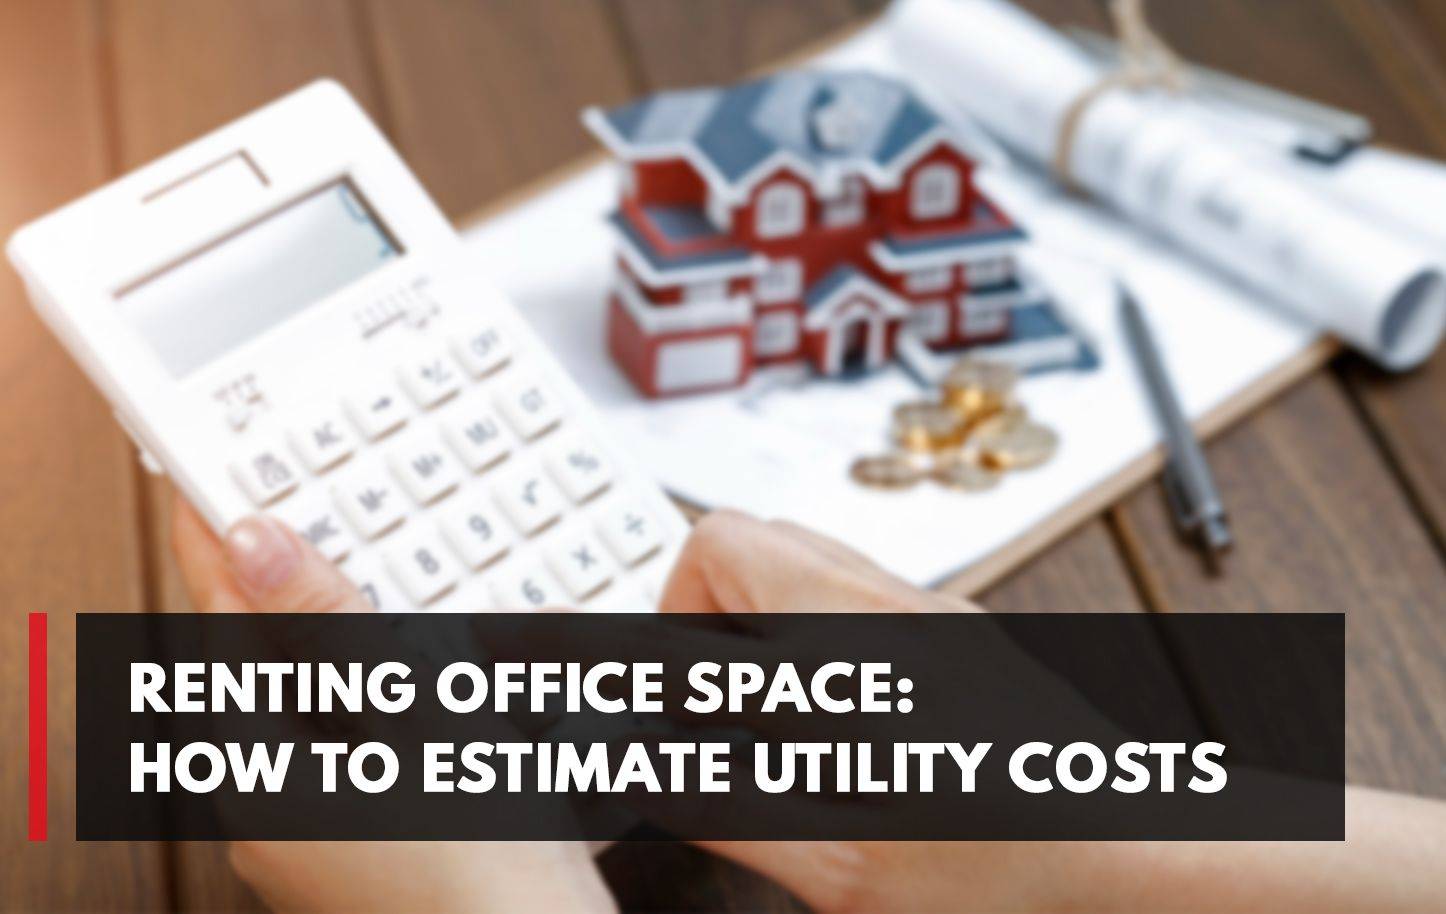 Renting office space: How to estimate utility costs